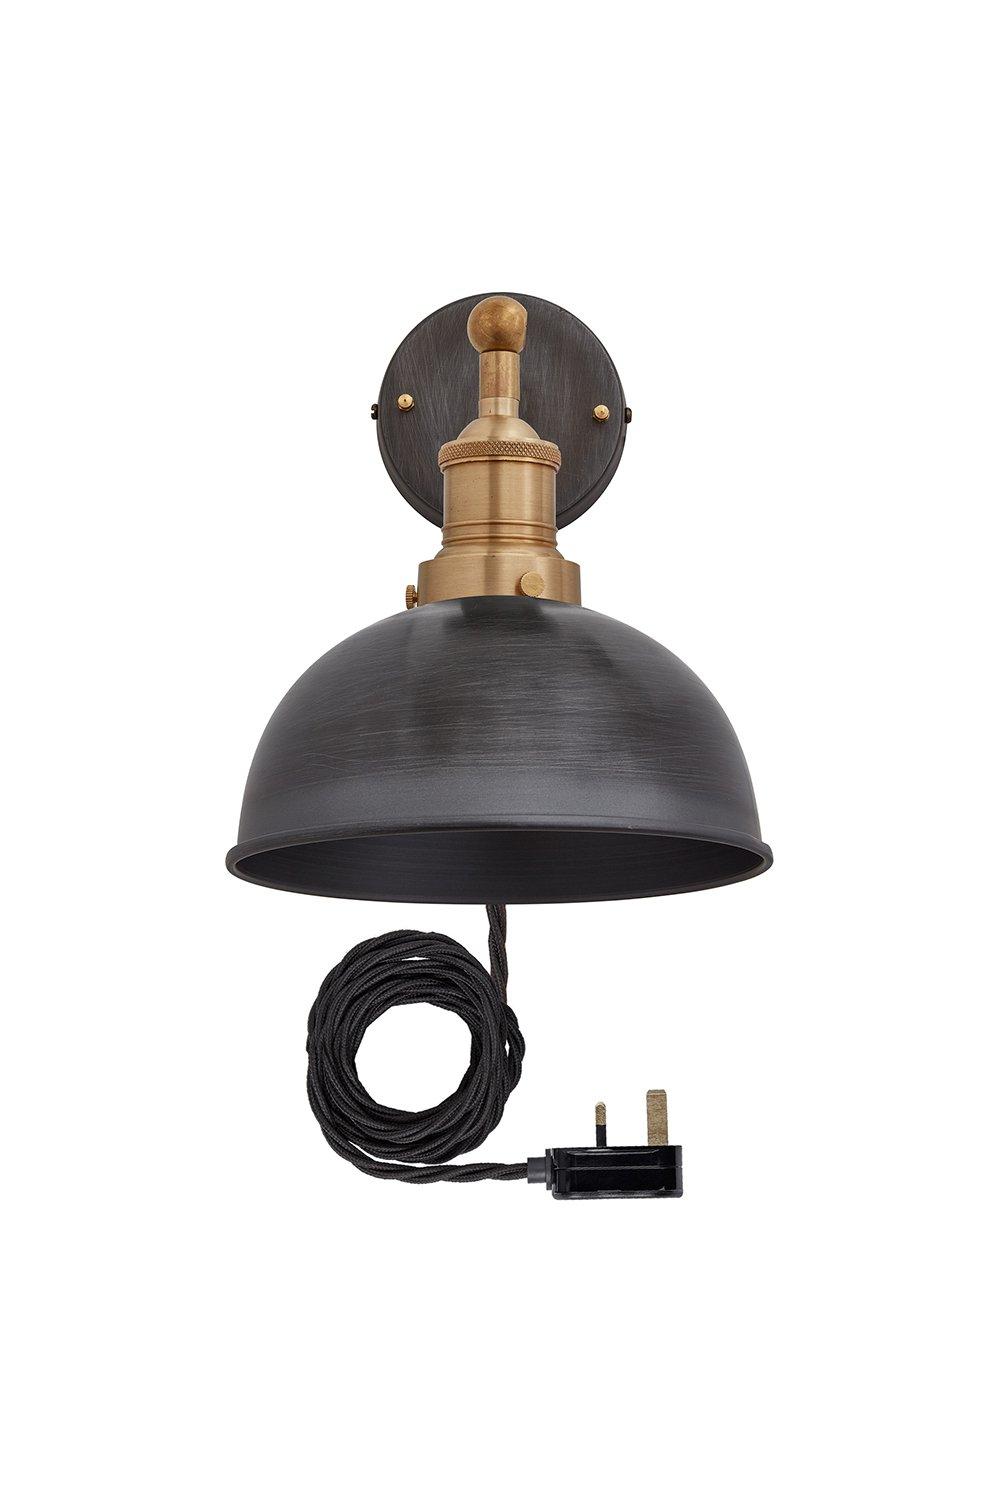 Brooklyn Dome Wall Light, 8 Inch, Pewter, Brass Holder With Plug